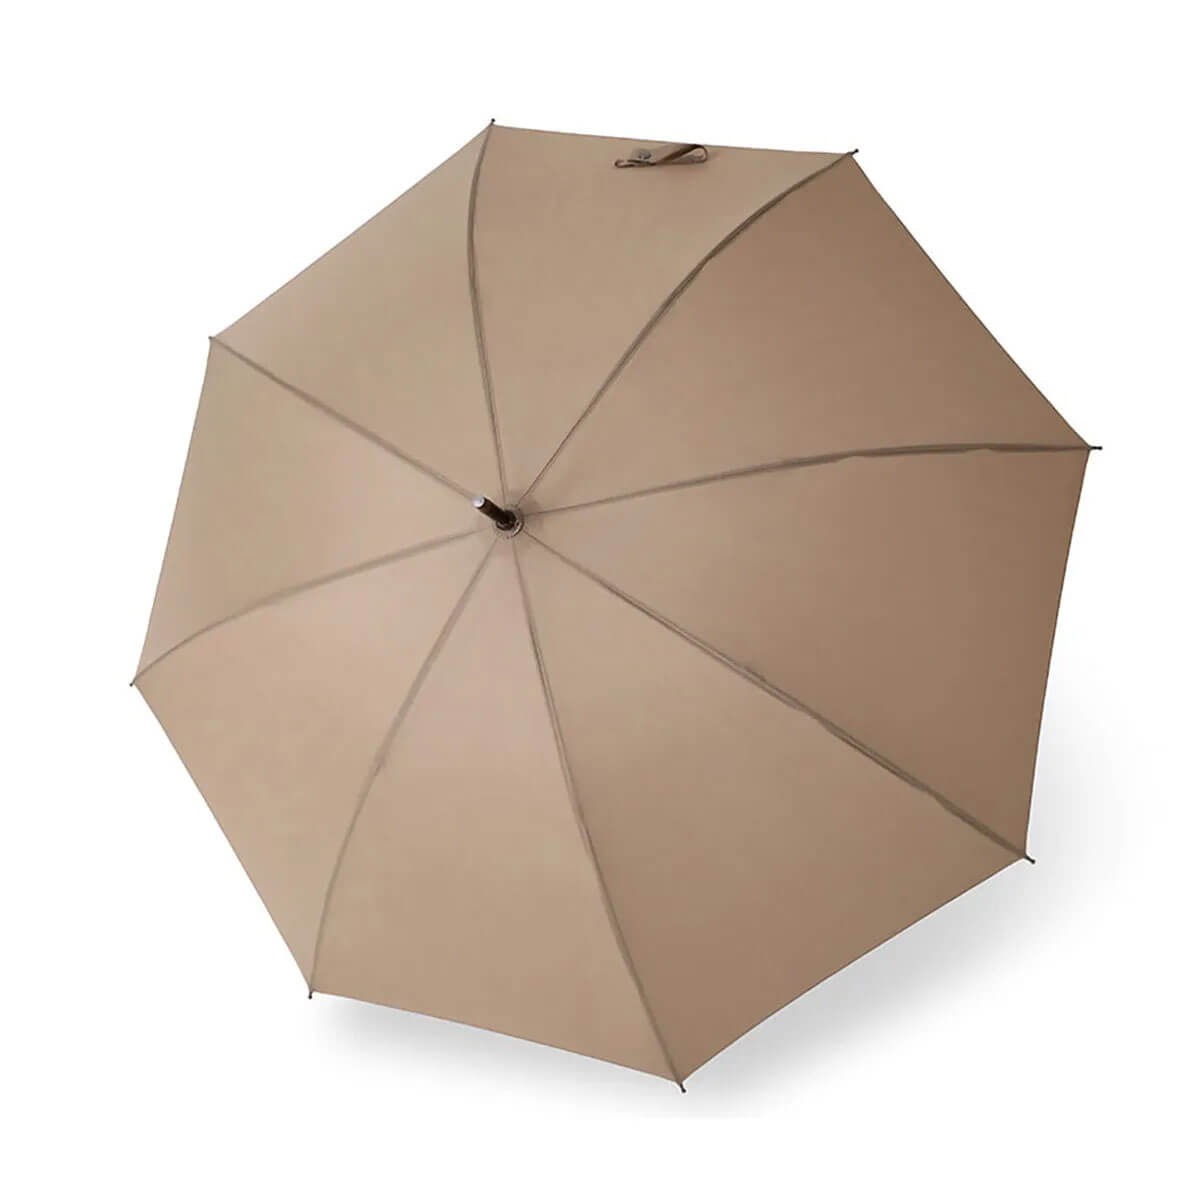 Provides protection from rain and elements